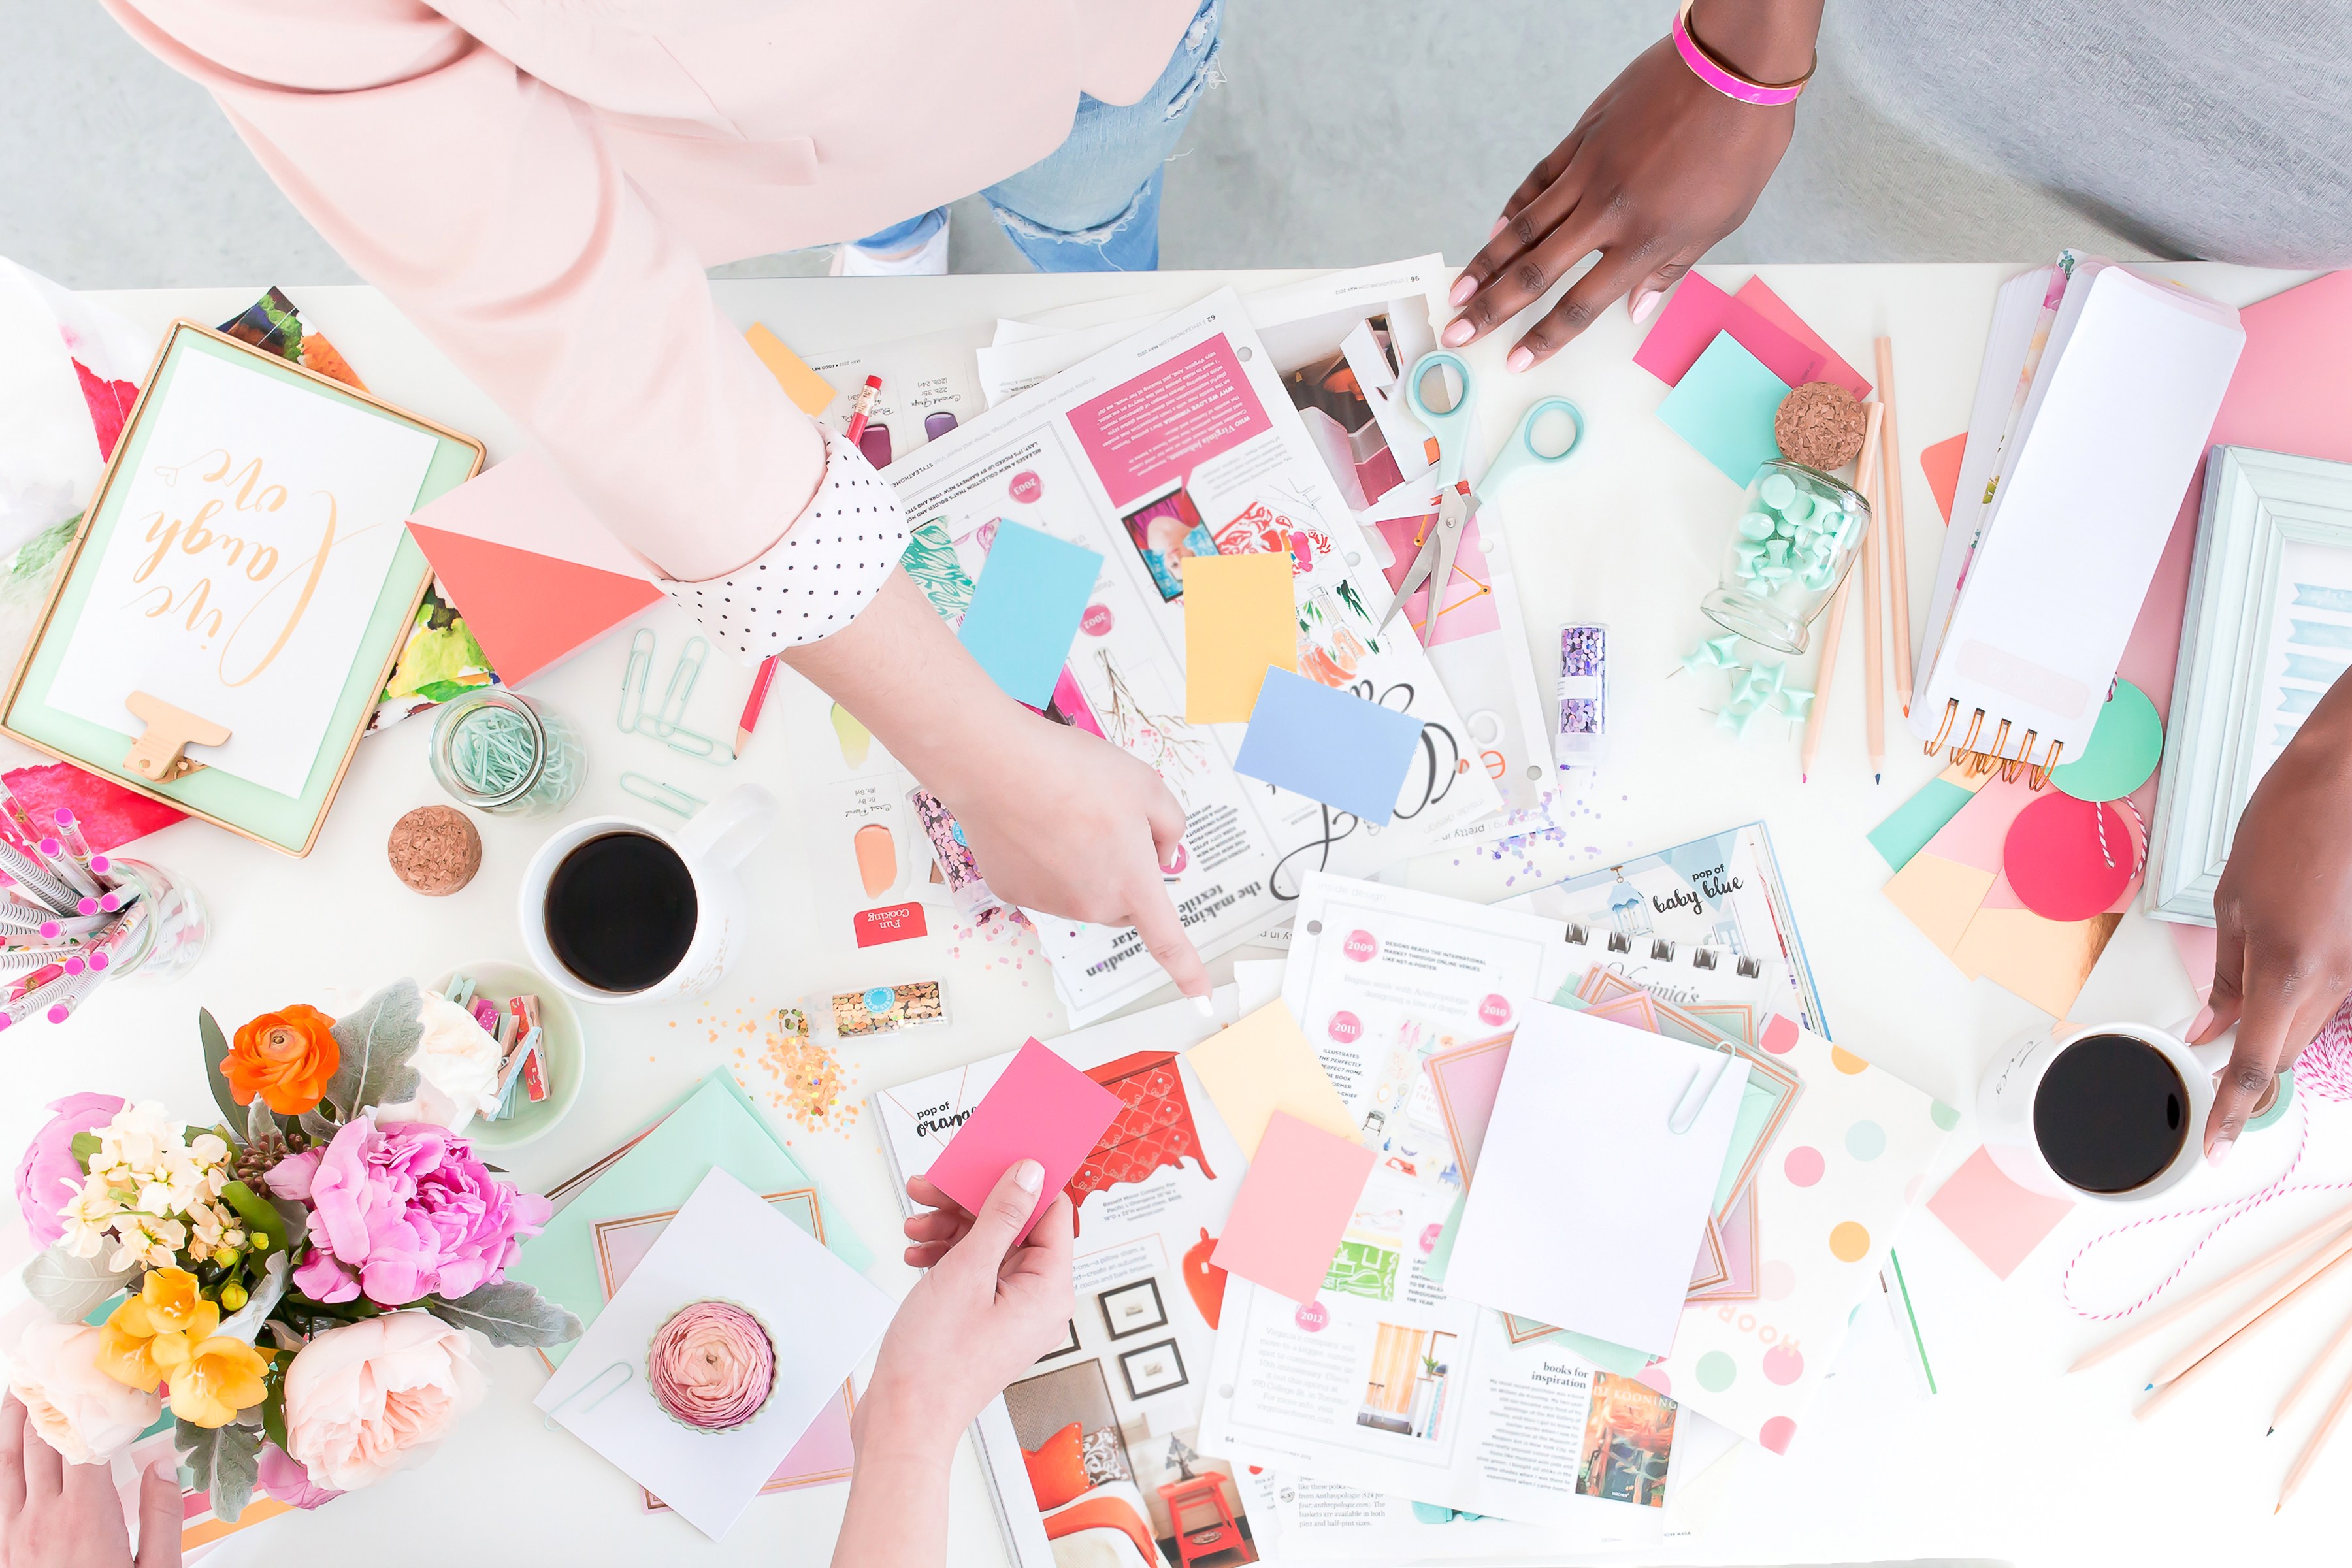 The Best Resources for Starting A Craft Business